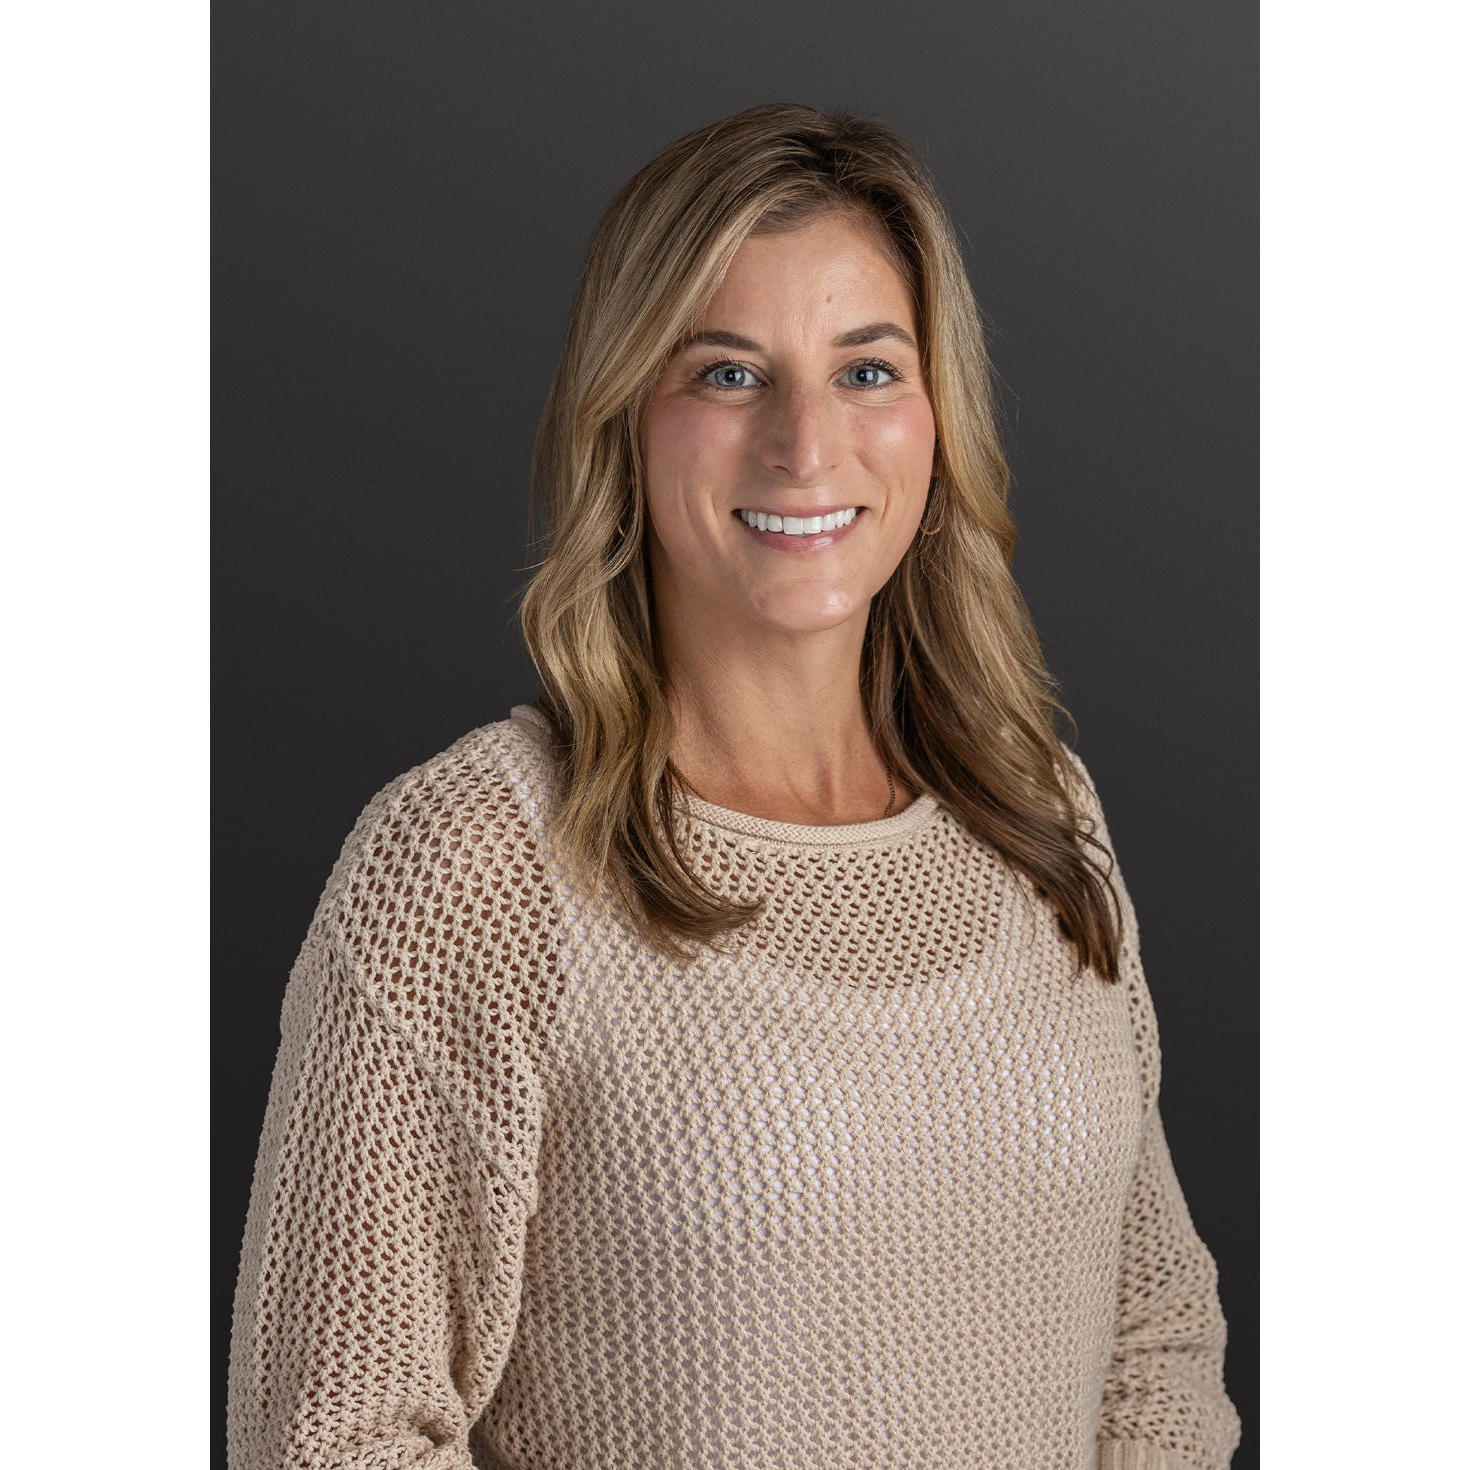 Dr. Kristyn Newhall, MD